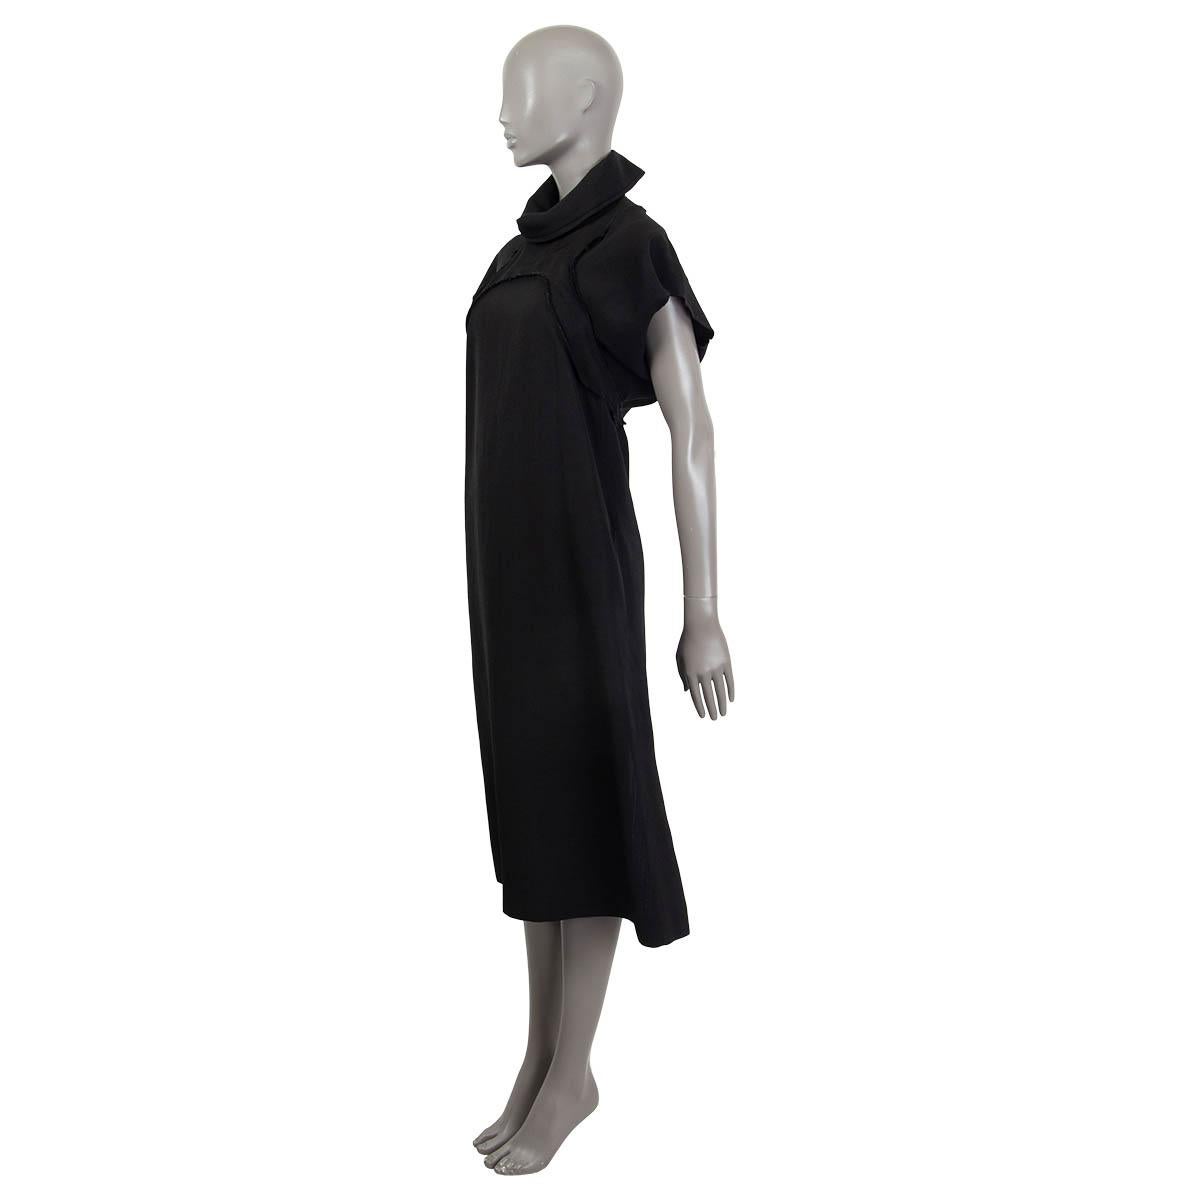 100% authentic Céline by Phoebe Philo shift dress in black viscose (57%) and silk (43%). Features a high rise draped collar and deconstructed details. Has two slit pockets at the sides and a slit on the back. Opens with a concealed zipper and a hook